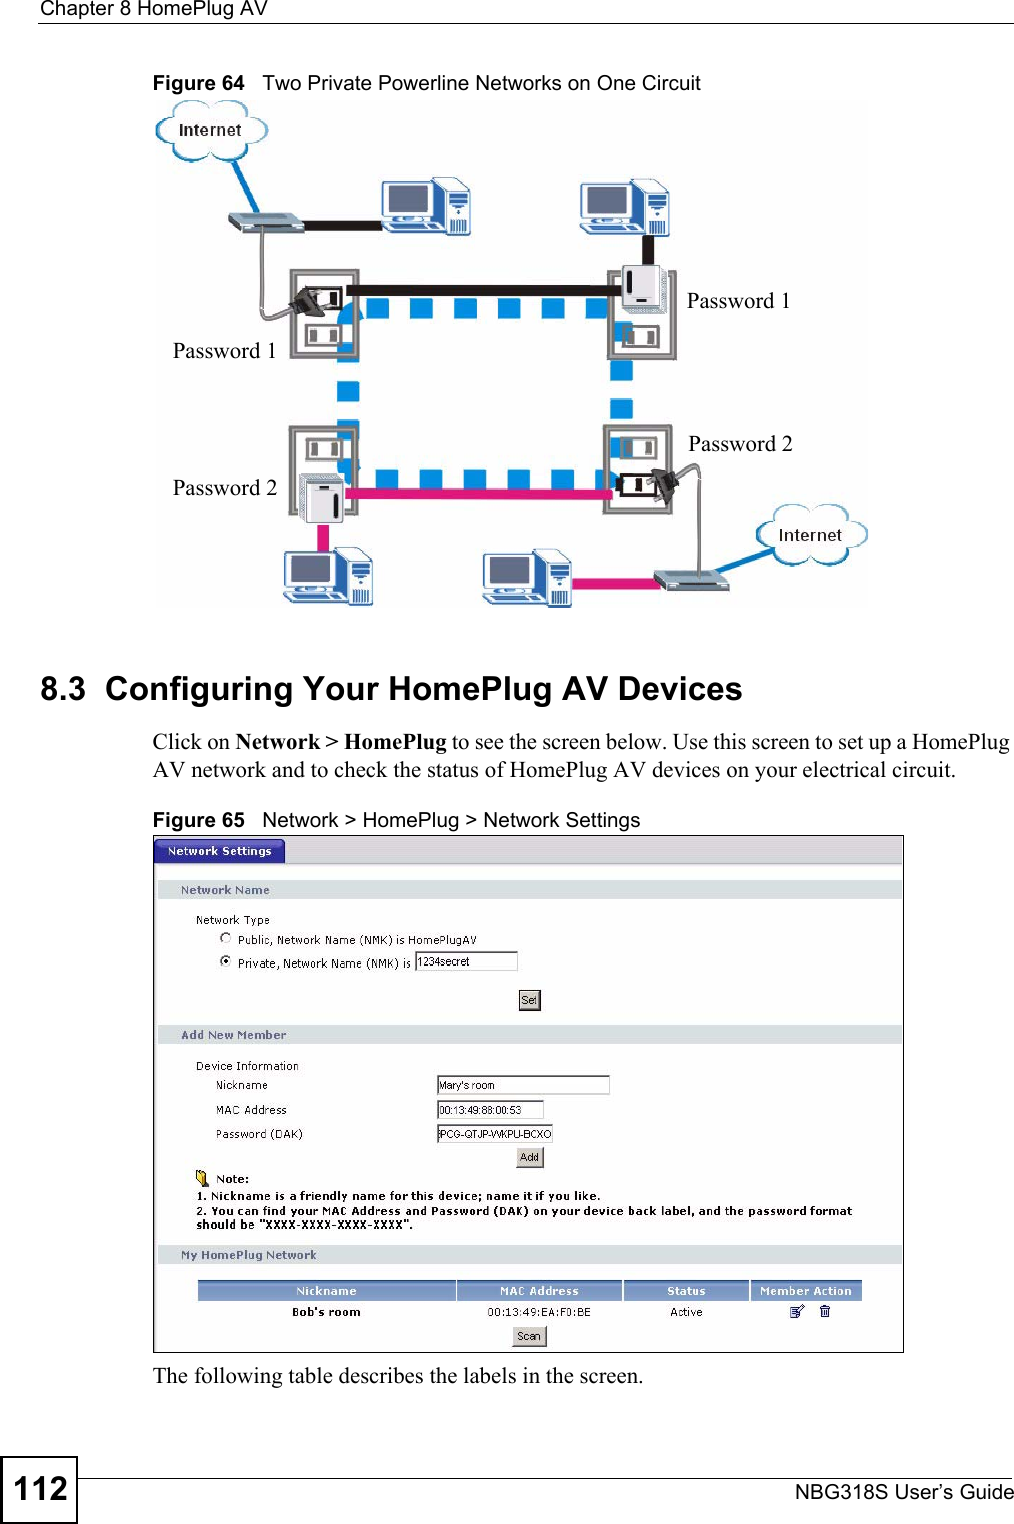 Chapter 8 HomePlug AVNBG318S User’s Guide112Figure 64   Two Private Powerline Networks on One Circuit8.3  Configuring Your HomePlug AV DevicesClick on Network &gt; HomePlug to see the screen below. Use this screen to set up a HomePlug AV network and to check the status of HomePlug AV devices on your electrical circuit.Figure 65   Network &gt; HomePlug &gt; Network SettingsThe following table describes the labels in the screen.Password 1Password 2Password 2Password 1